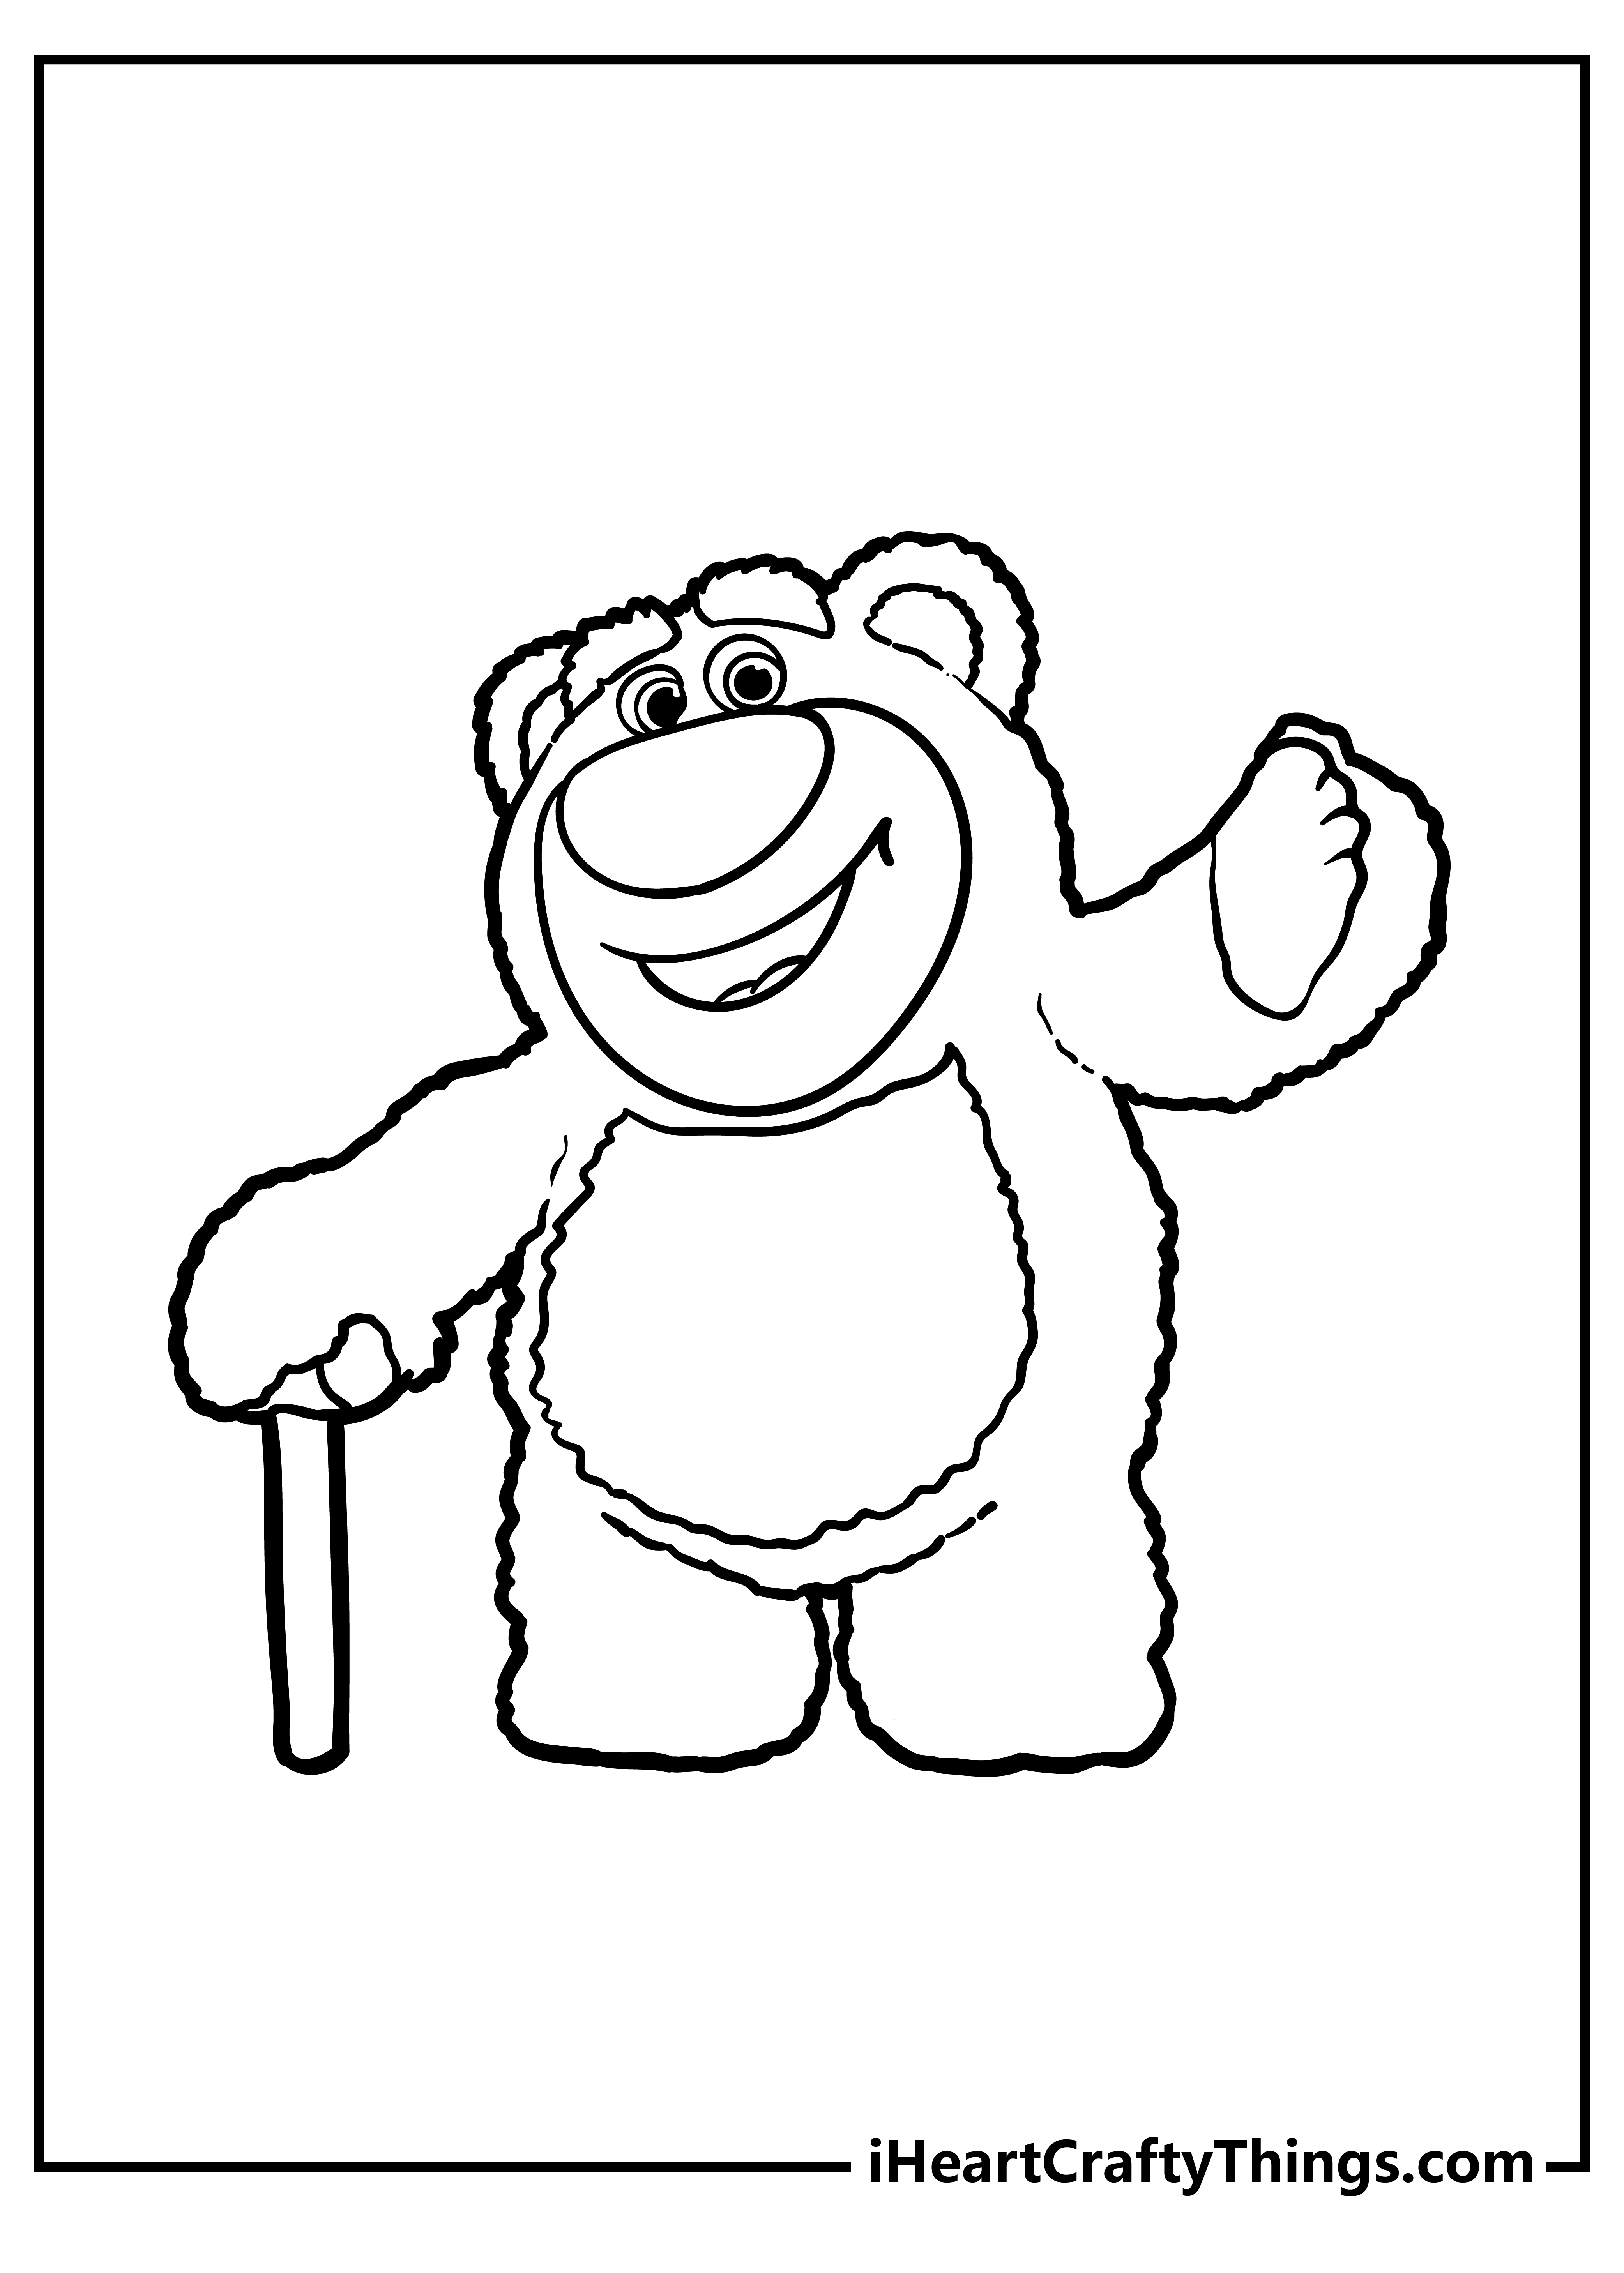 Toy Story Coloring Pages for kids free download